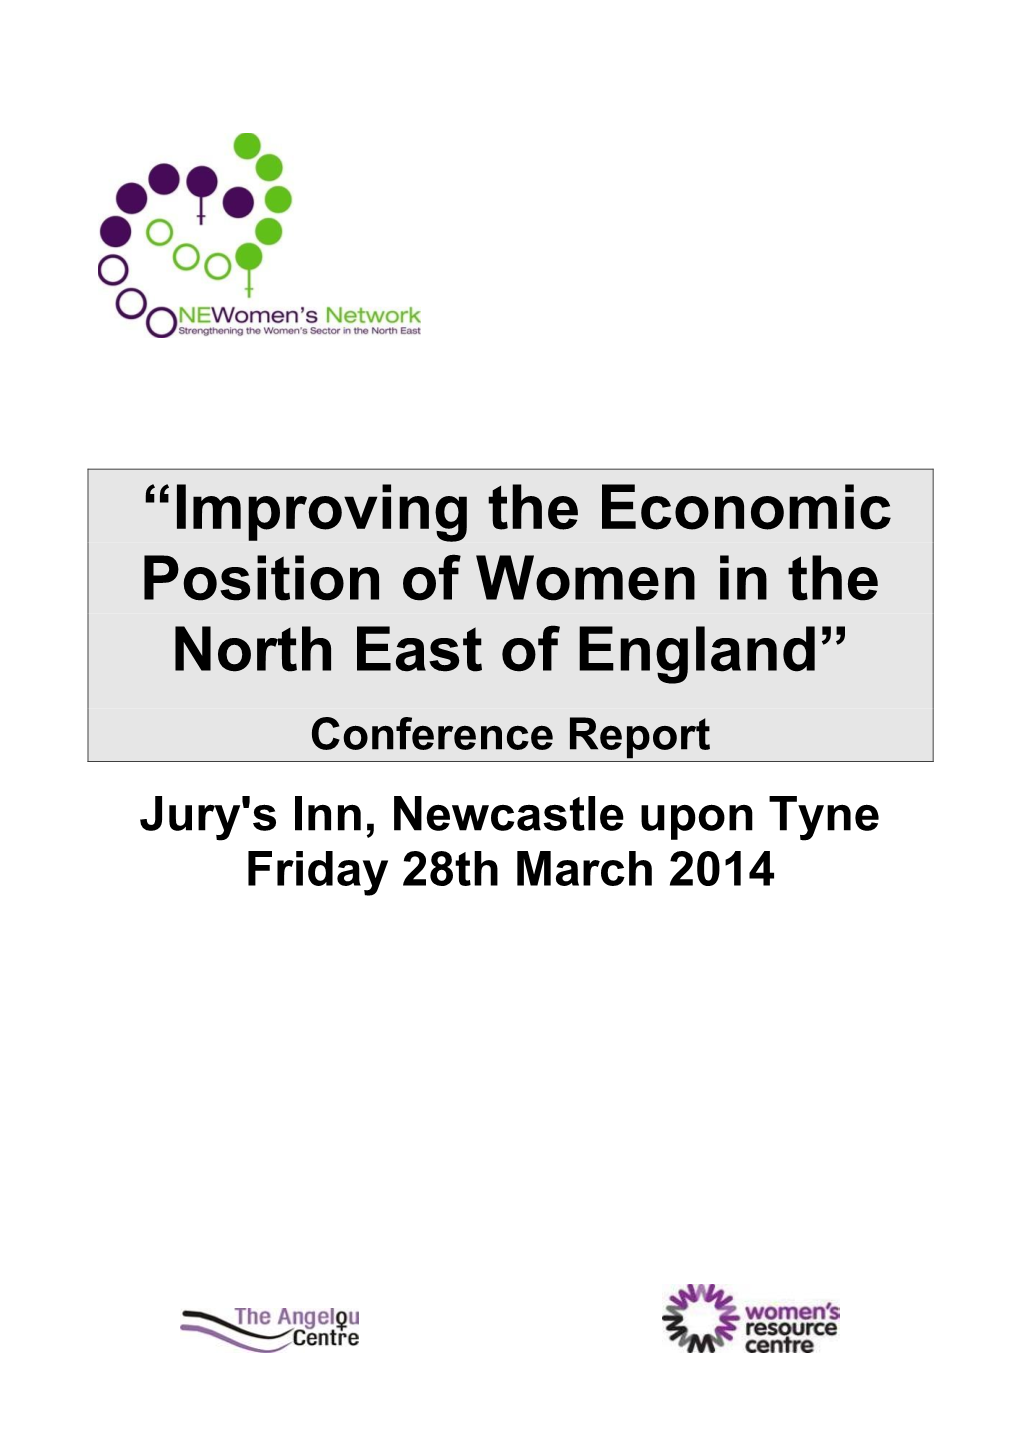 Improving the Economic Position of Women in the North East of England” Conference Report Jury's Inn, Newcastle Upon Tyne Friday 28Th March 2014